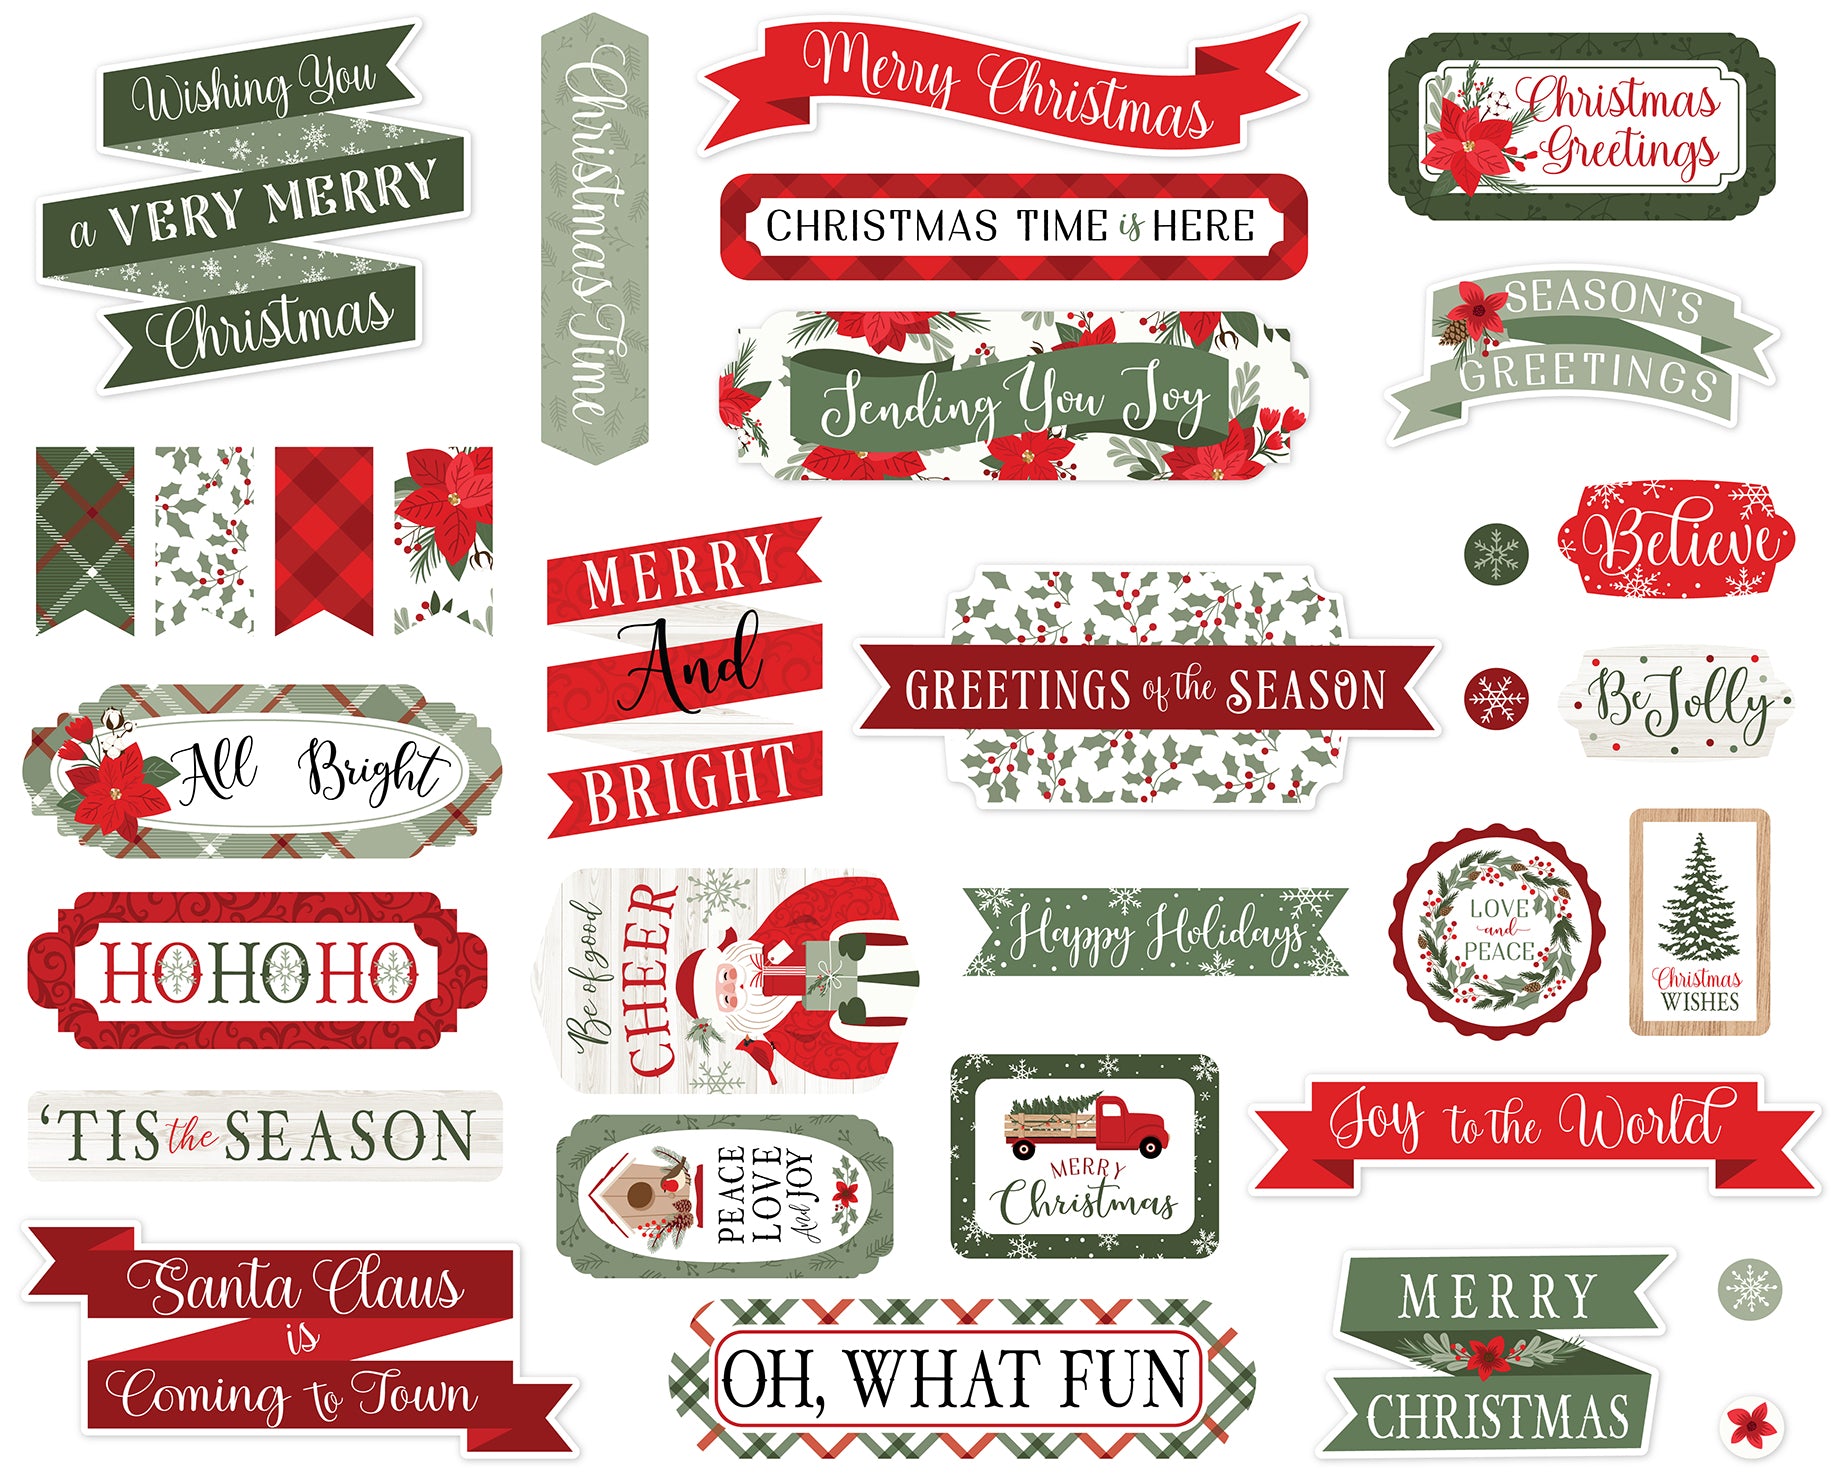 Christmas Time Collection Scrapbook Tags by Echo Park Paper